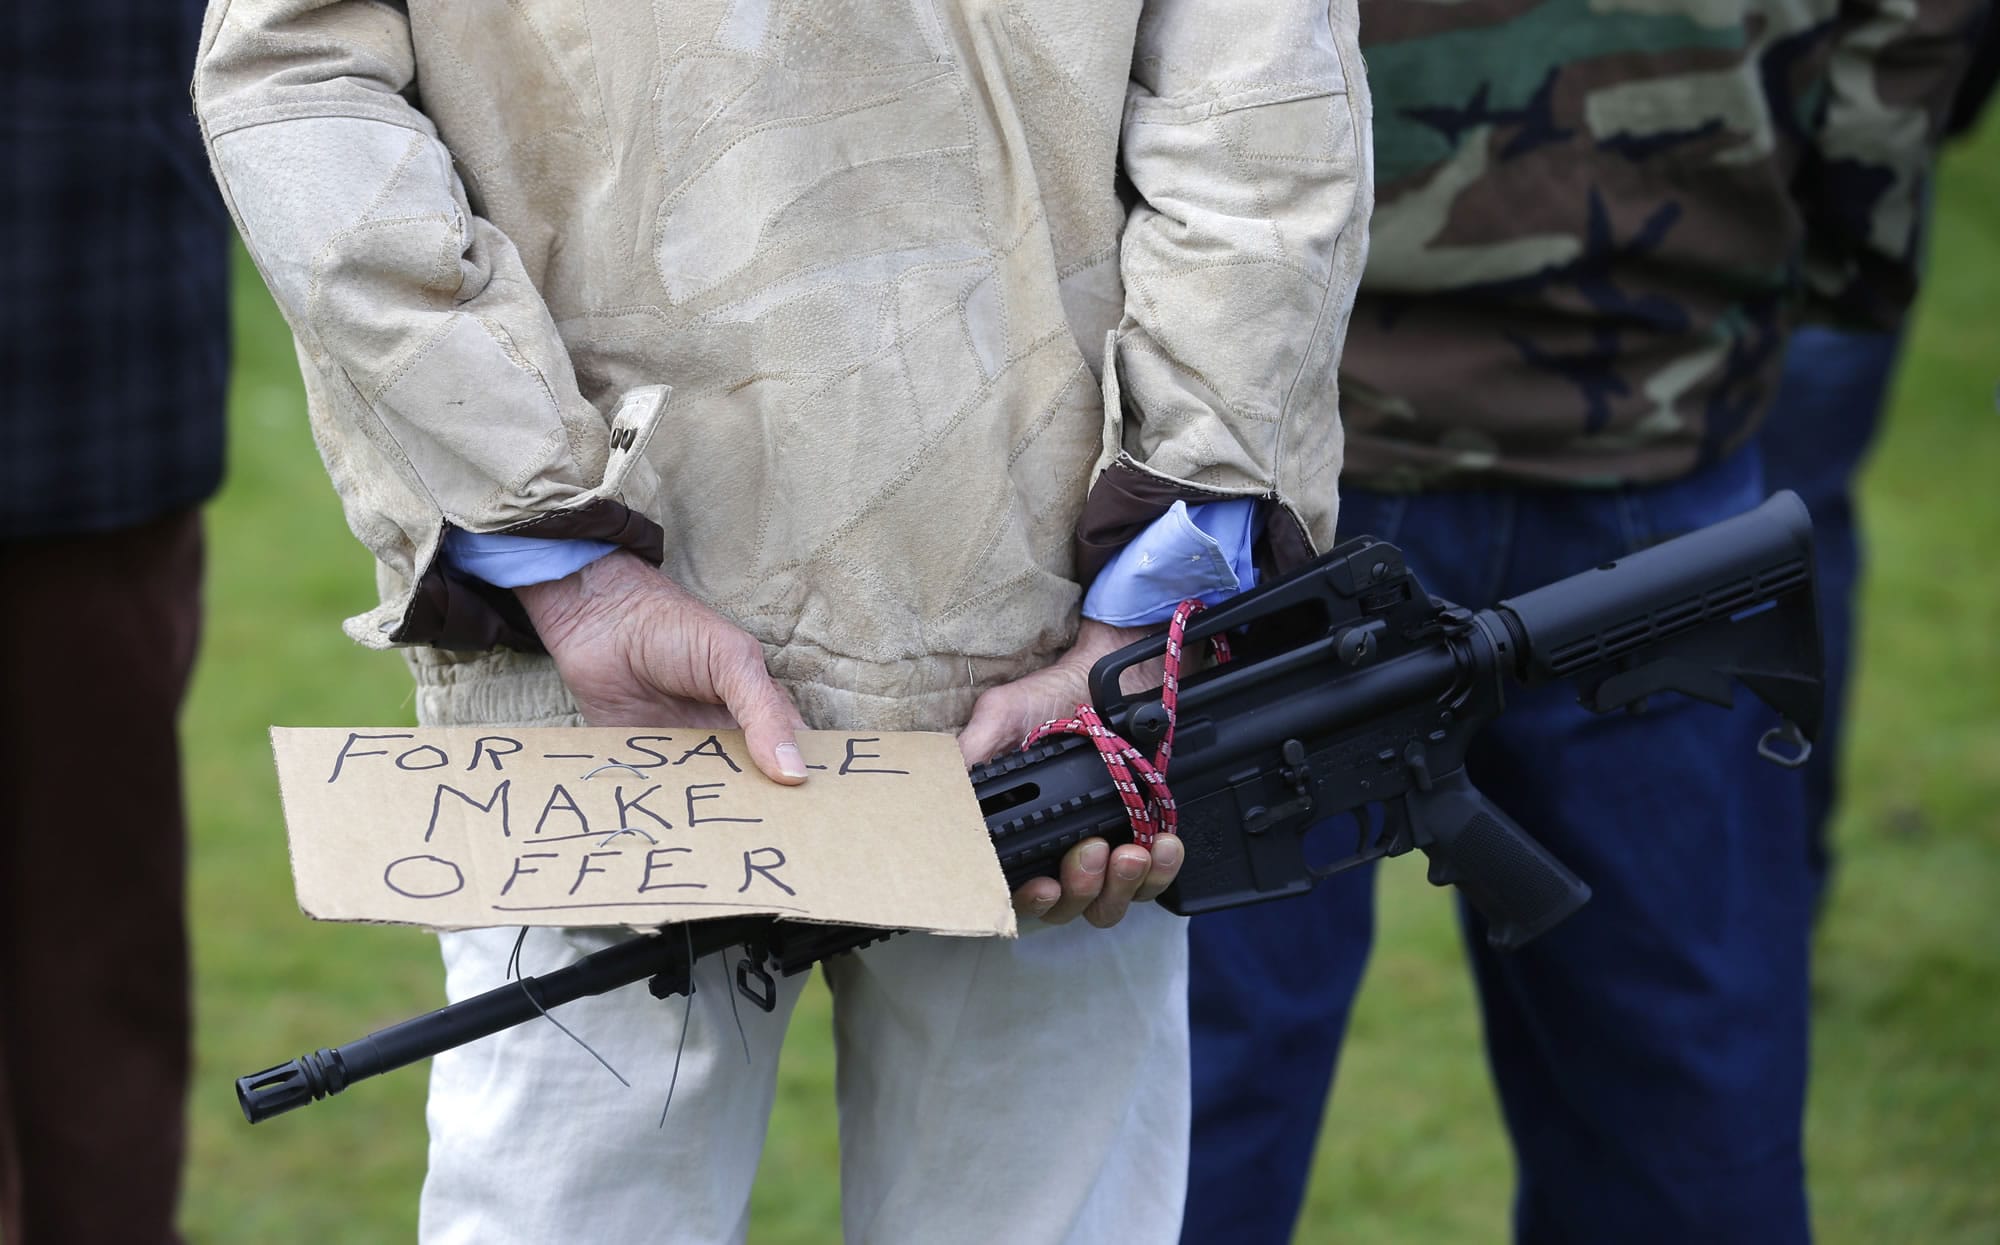 Ralph Eaton, of Tacoma, holds an Olympic Arms semi-automatic rifle and a sign that reads &quot;For-Sale Make Offer&quot; as he attends a gun rights rally Friday at the Capitol in Olympia. Eaton said a friend had given him the gun and he was willing to sell it if he received a good offer for it.